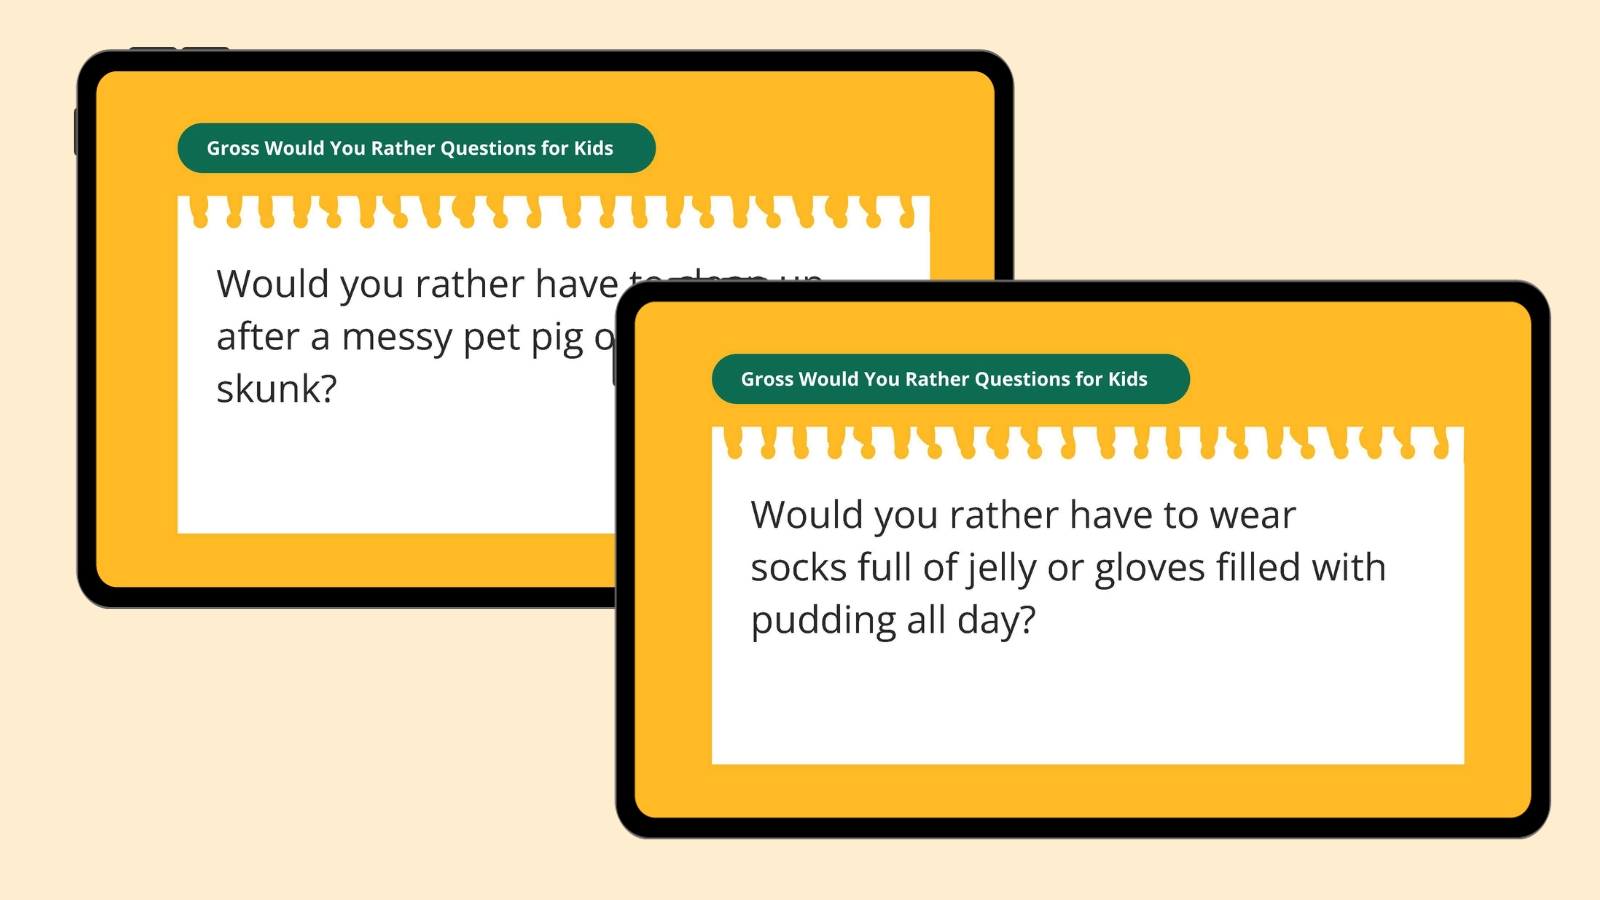 Would you rather have to wear socks full of jelly or gloves filled with pudding all day?